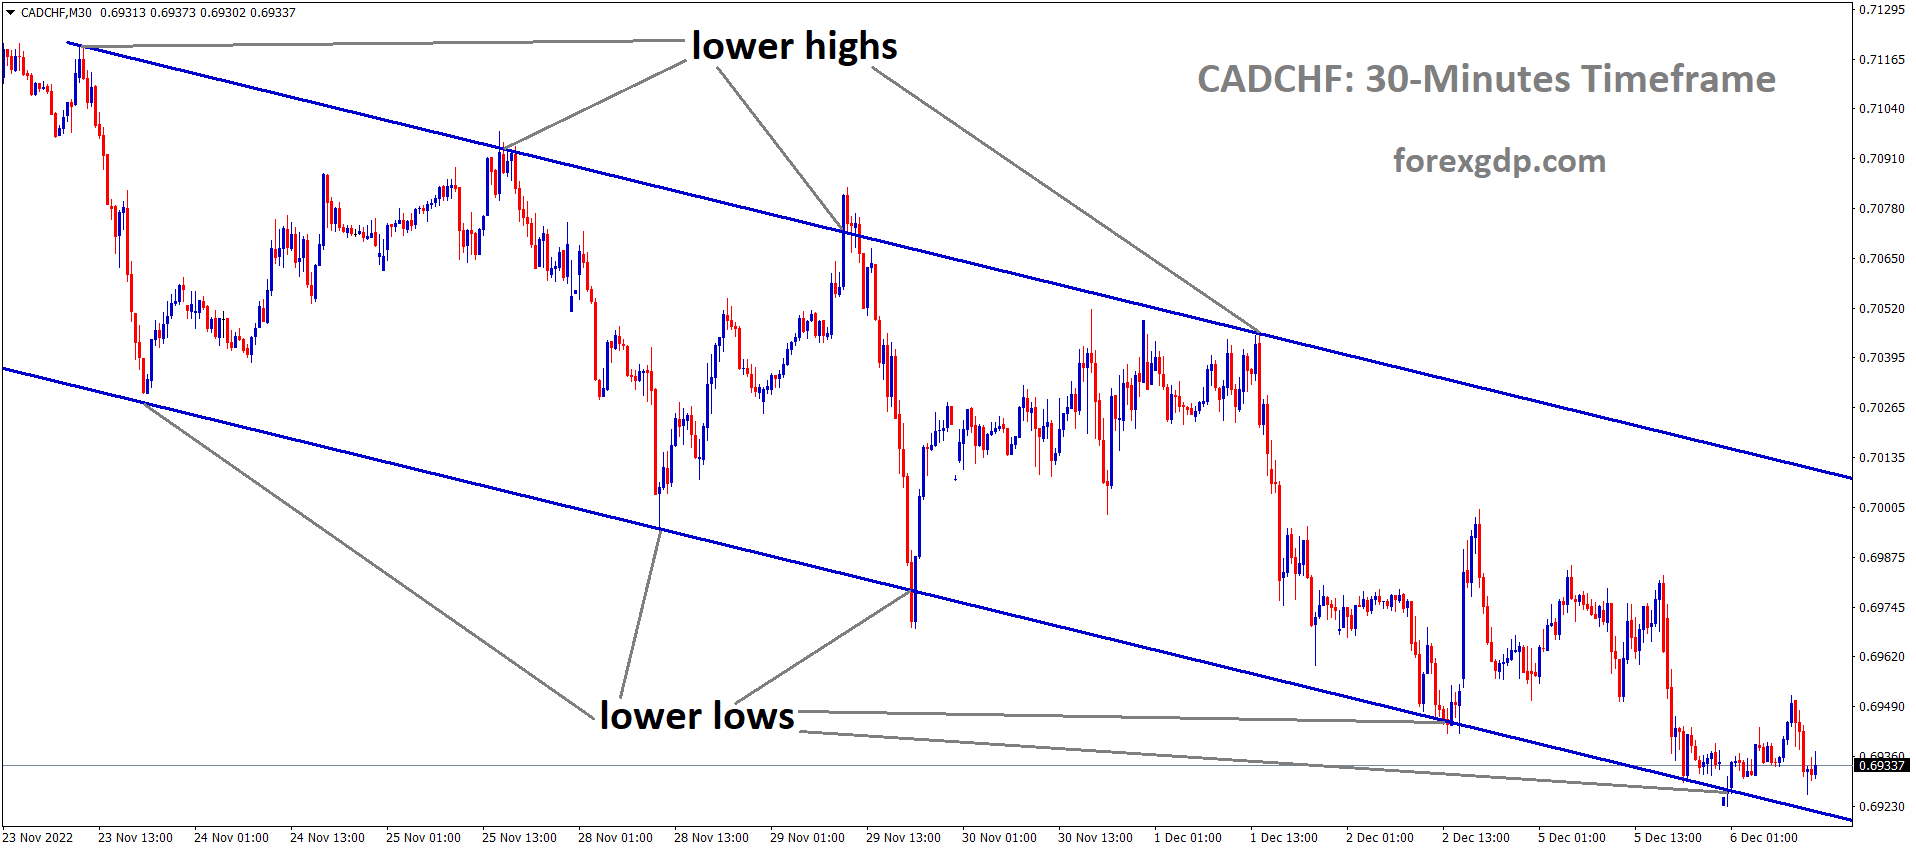 CADCHF is moving in the Descending channel and the market has reached the lower low area of the channel 1